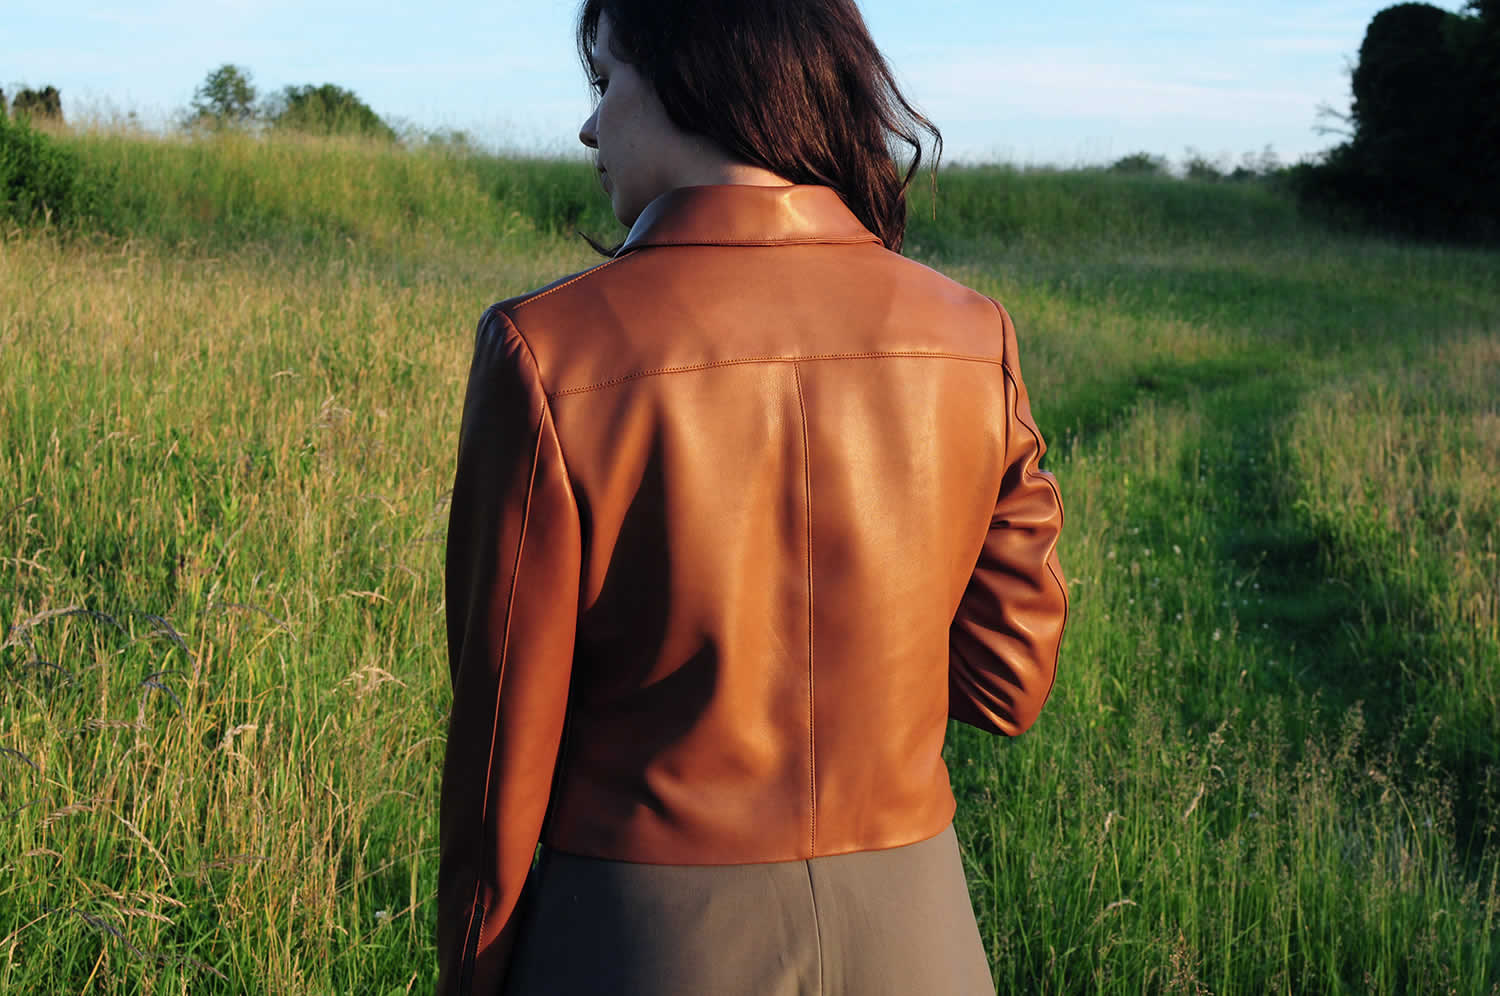 ladulsatina Sewing and DIY fashion blog: leather jacket and playsuit - back